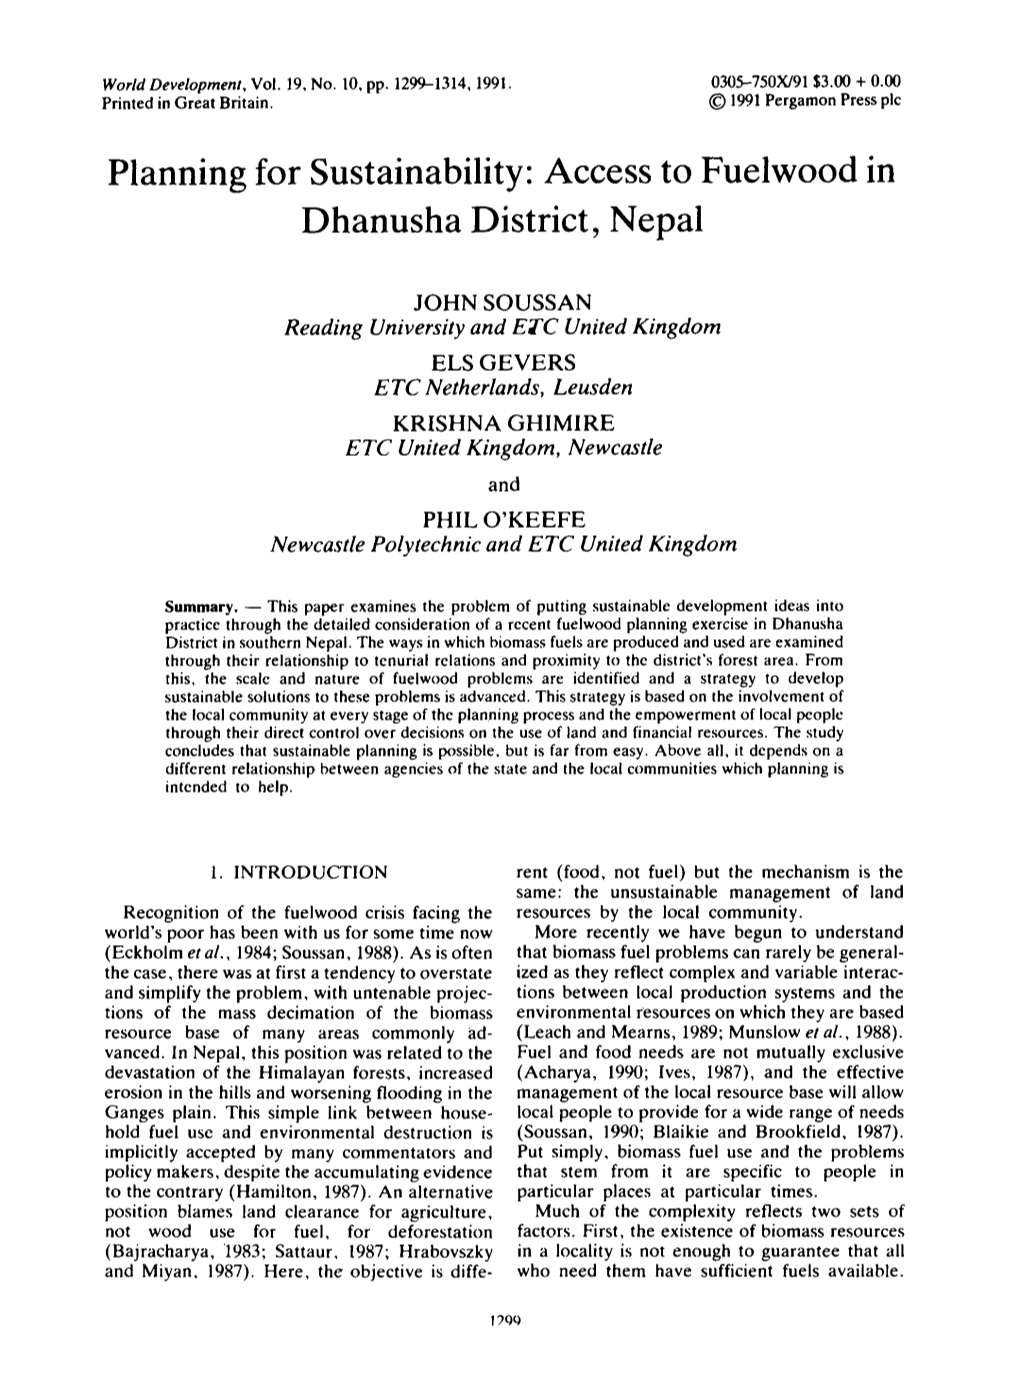 Planning for Sustainability: Access to Fuelwood in Dhanusha District, Nepal